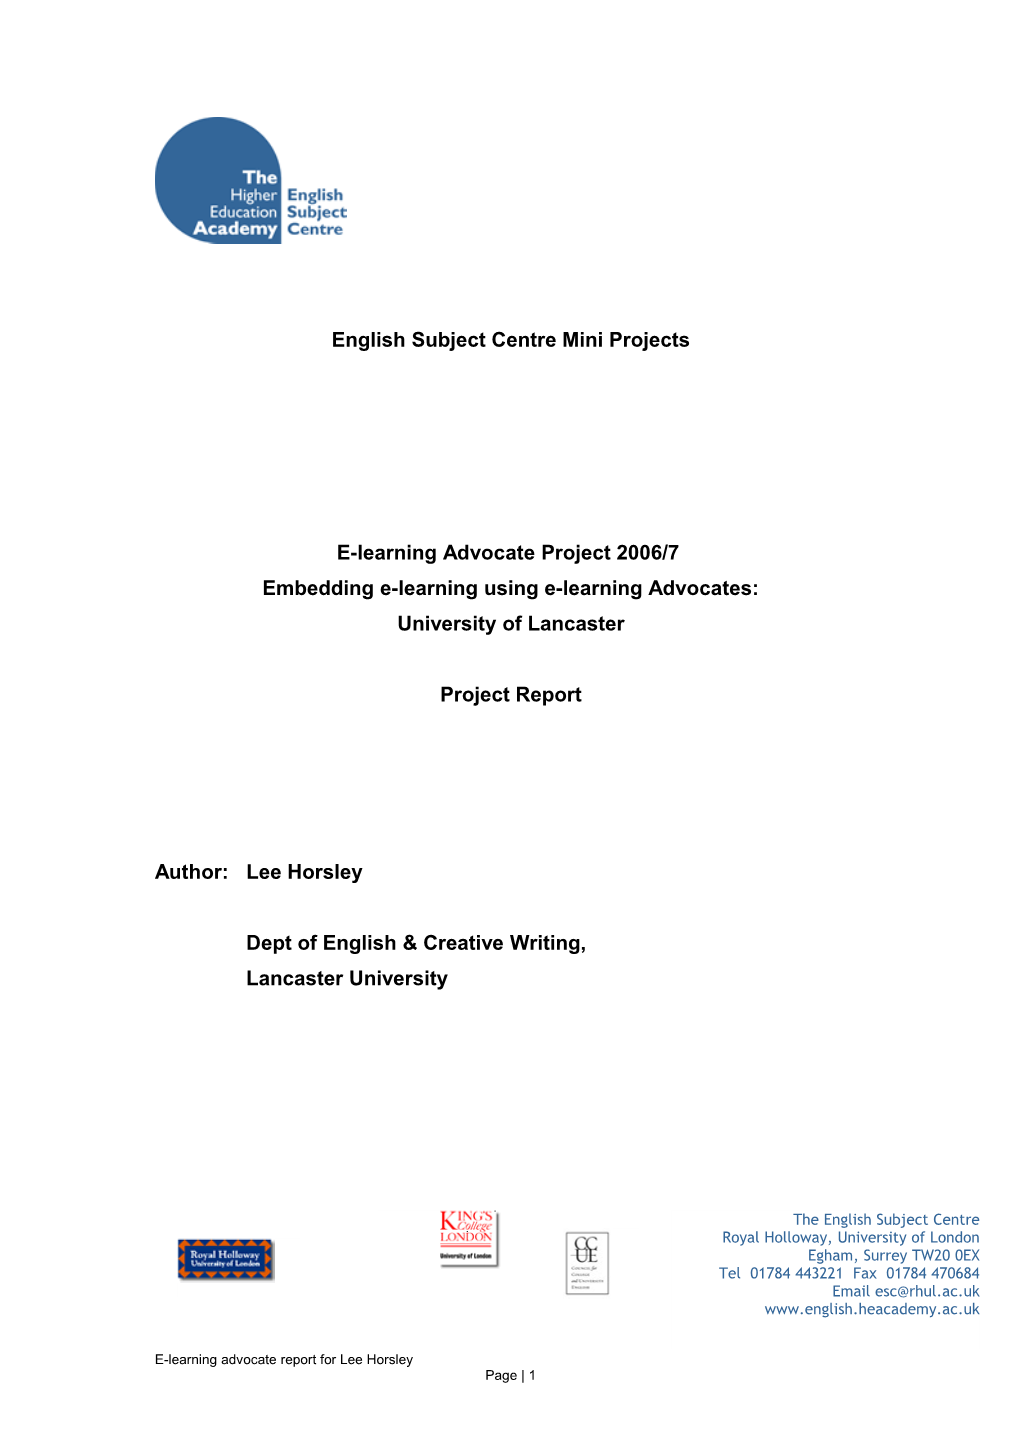 E-Learning Advocate Project Report - University of Lancaster